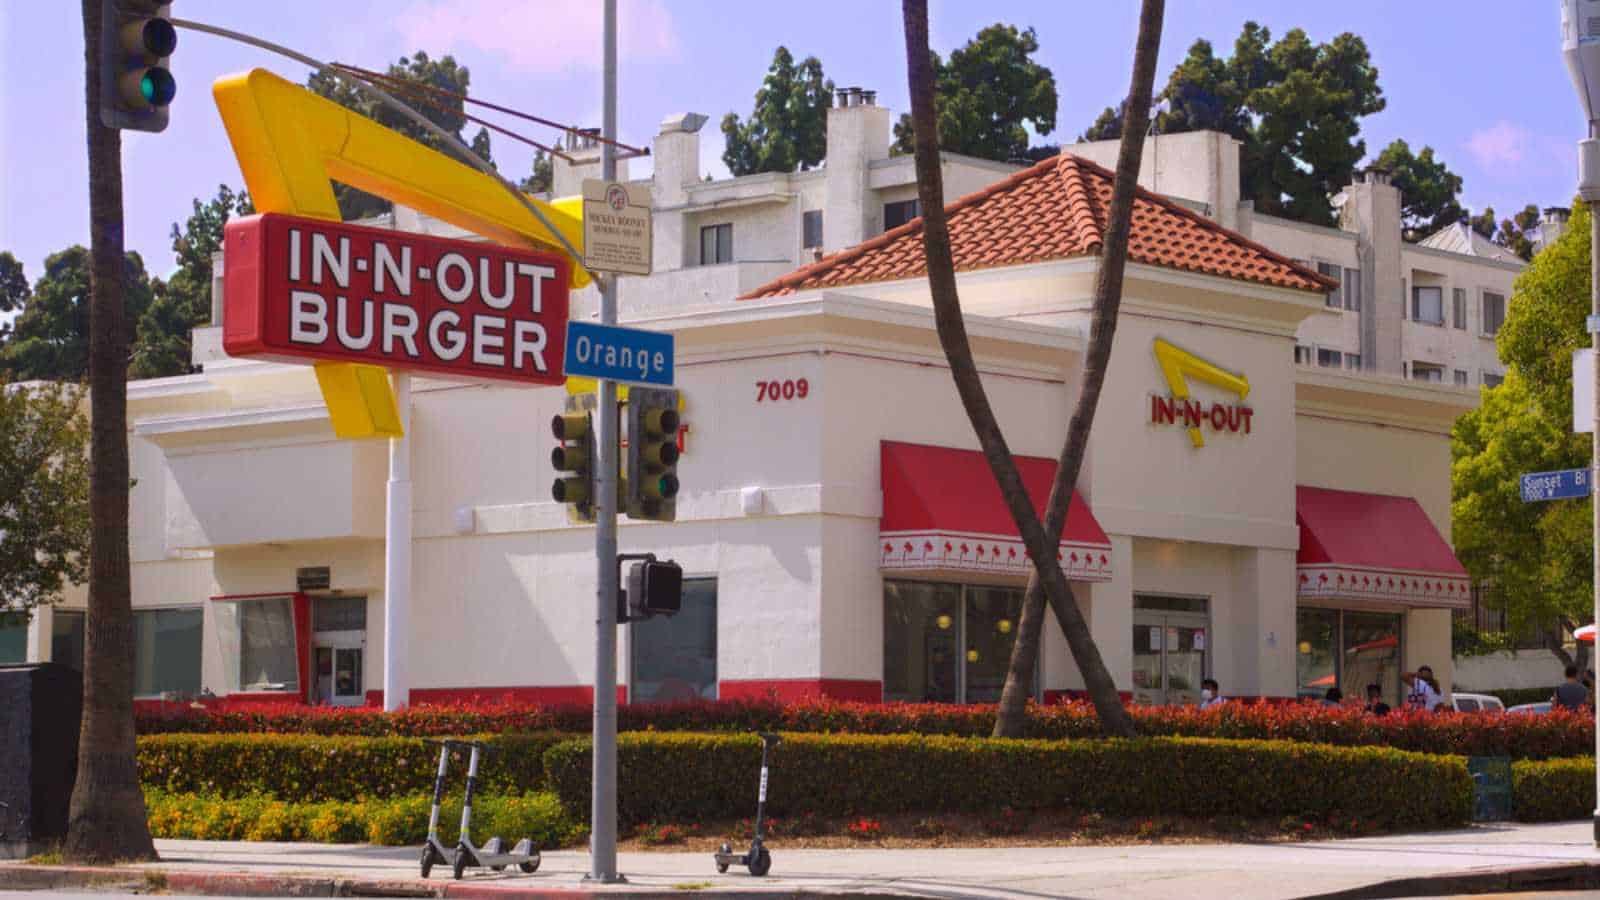 Los Angeles - May 15, 2021: In-N-Out Burger Restaurant day exterior
